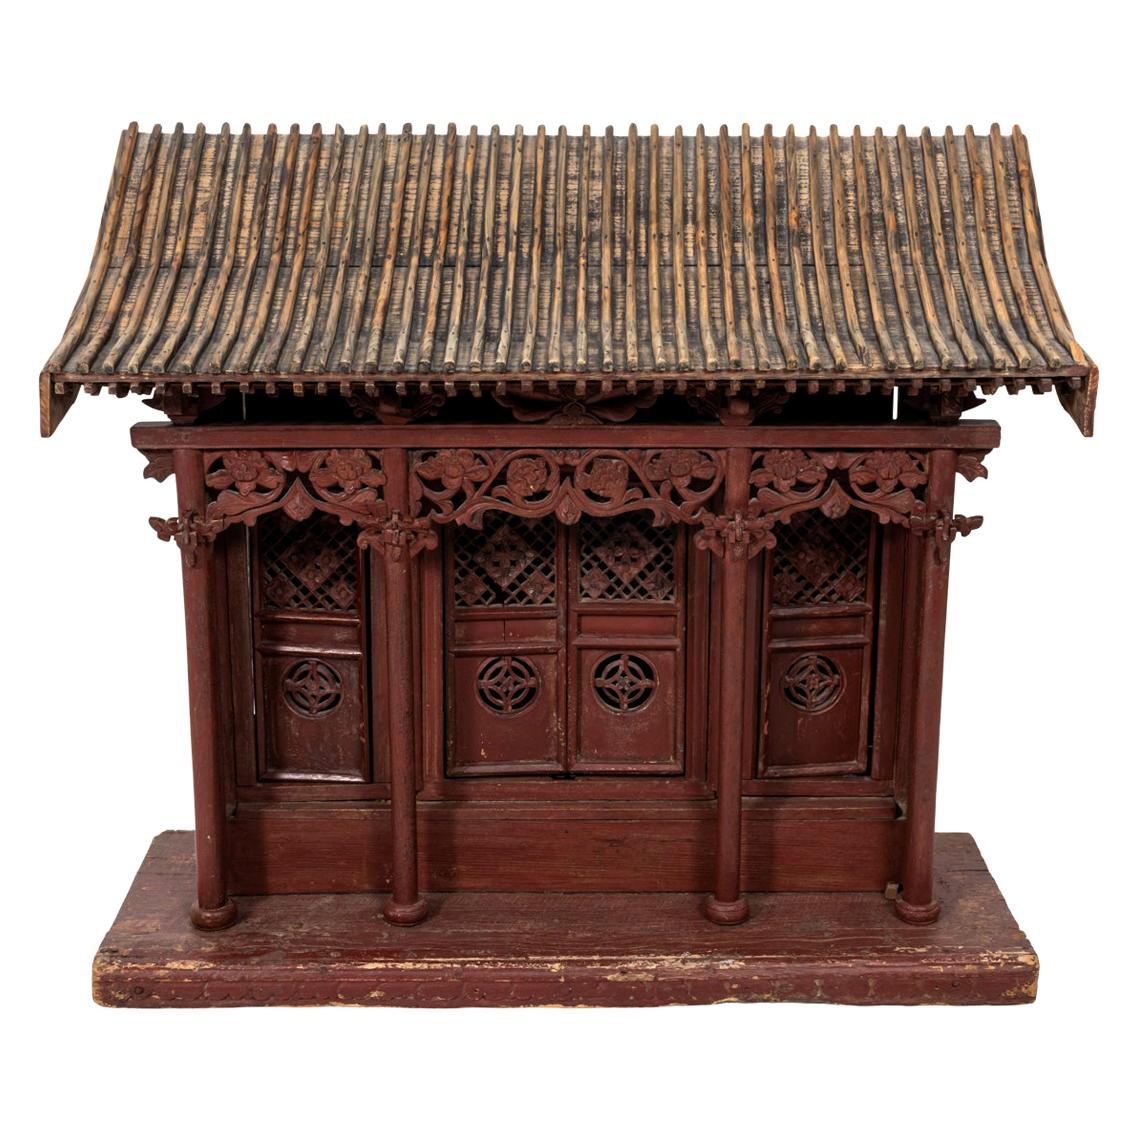 Antique Wooden Chinese Temple For Sale